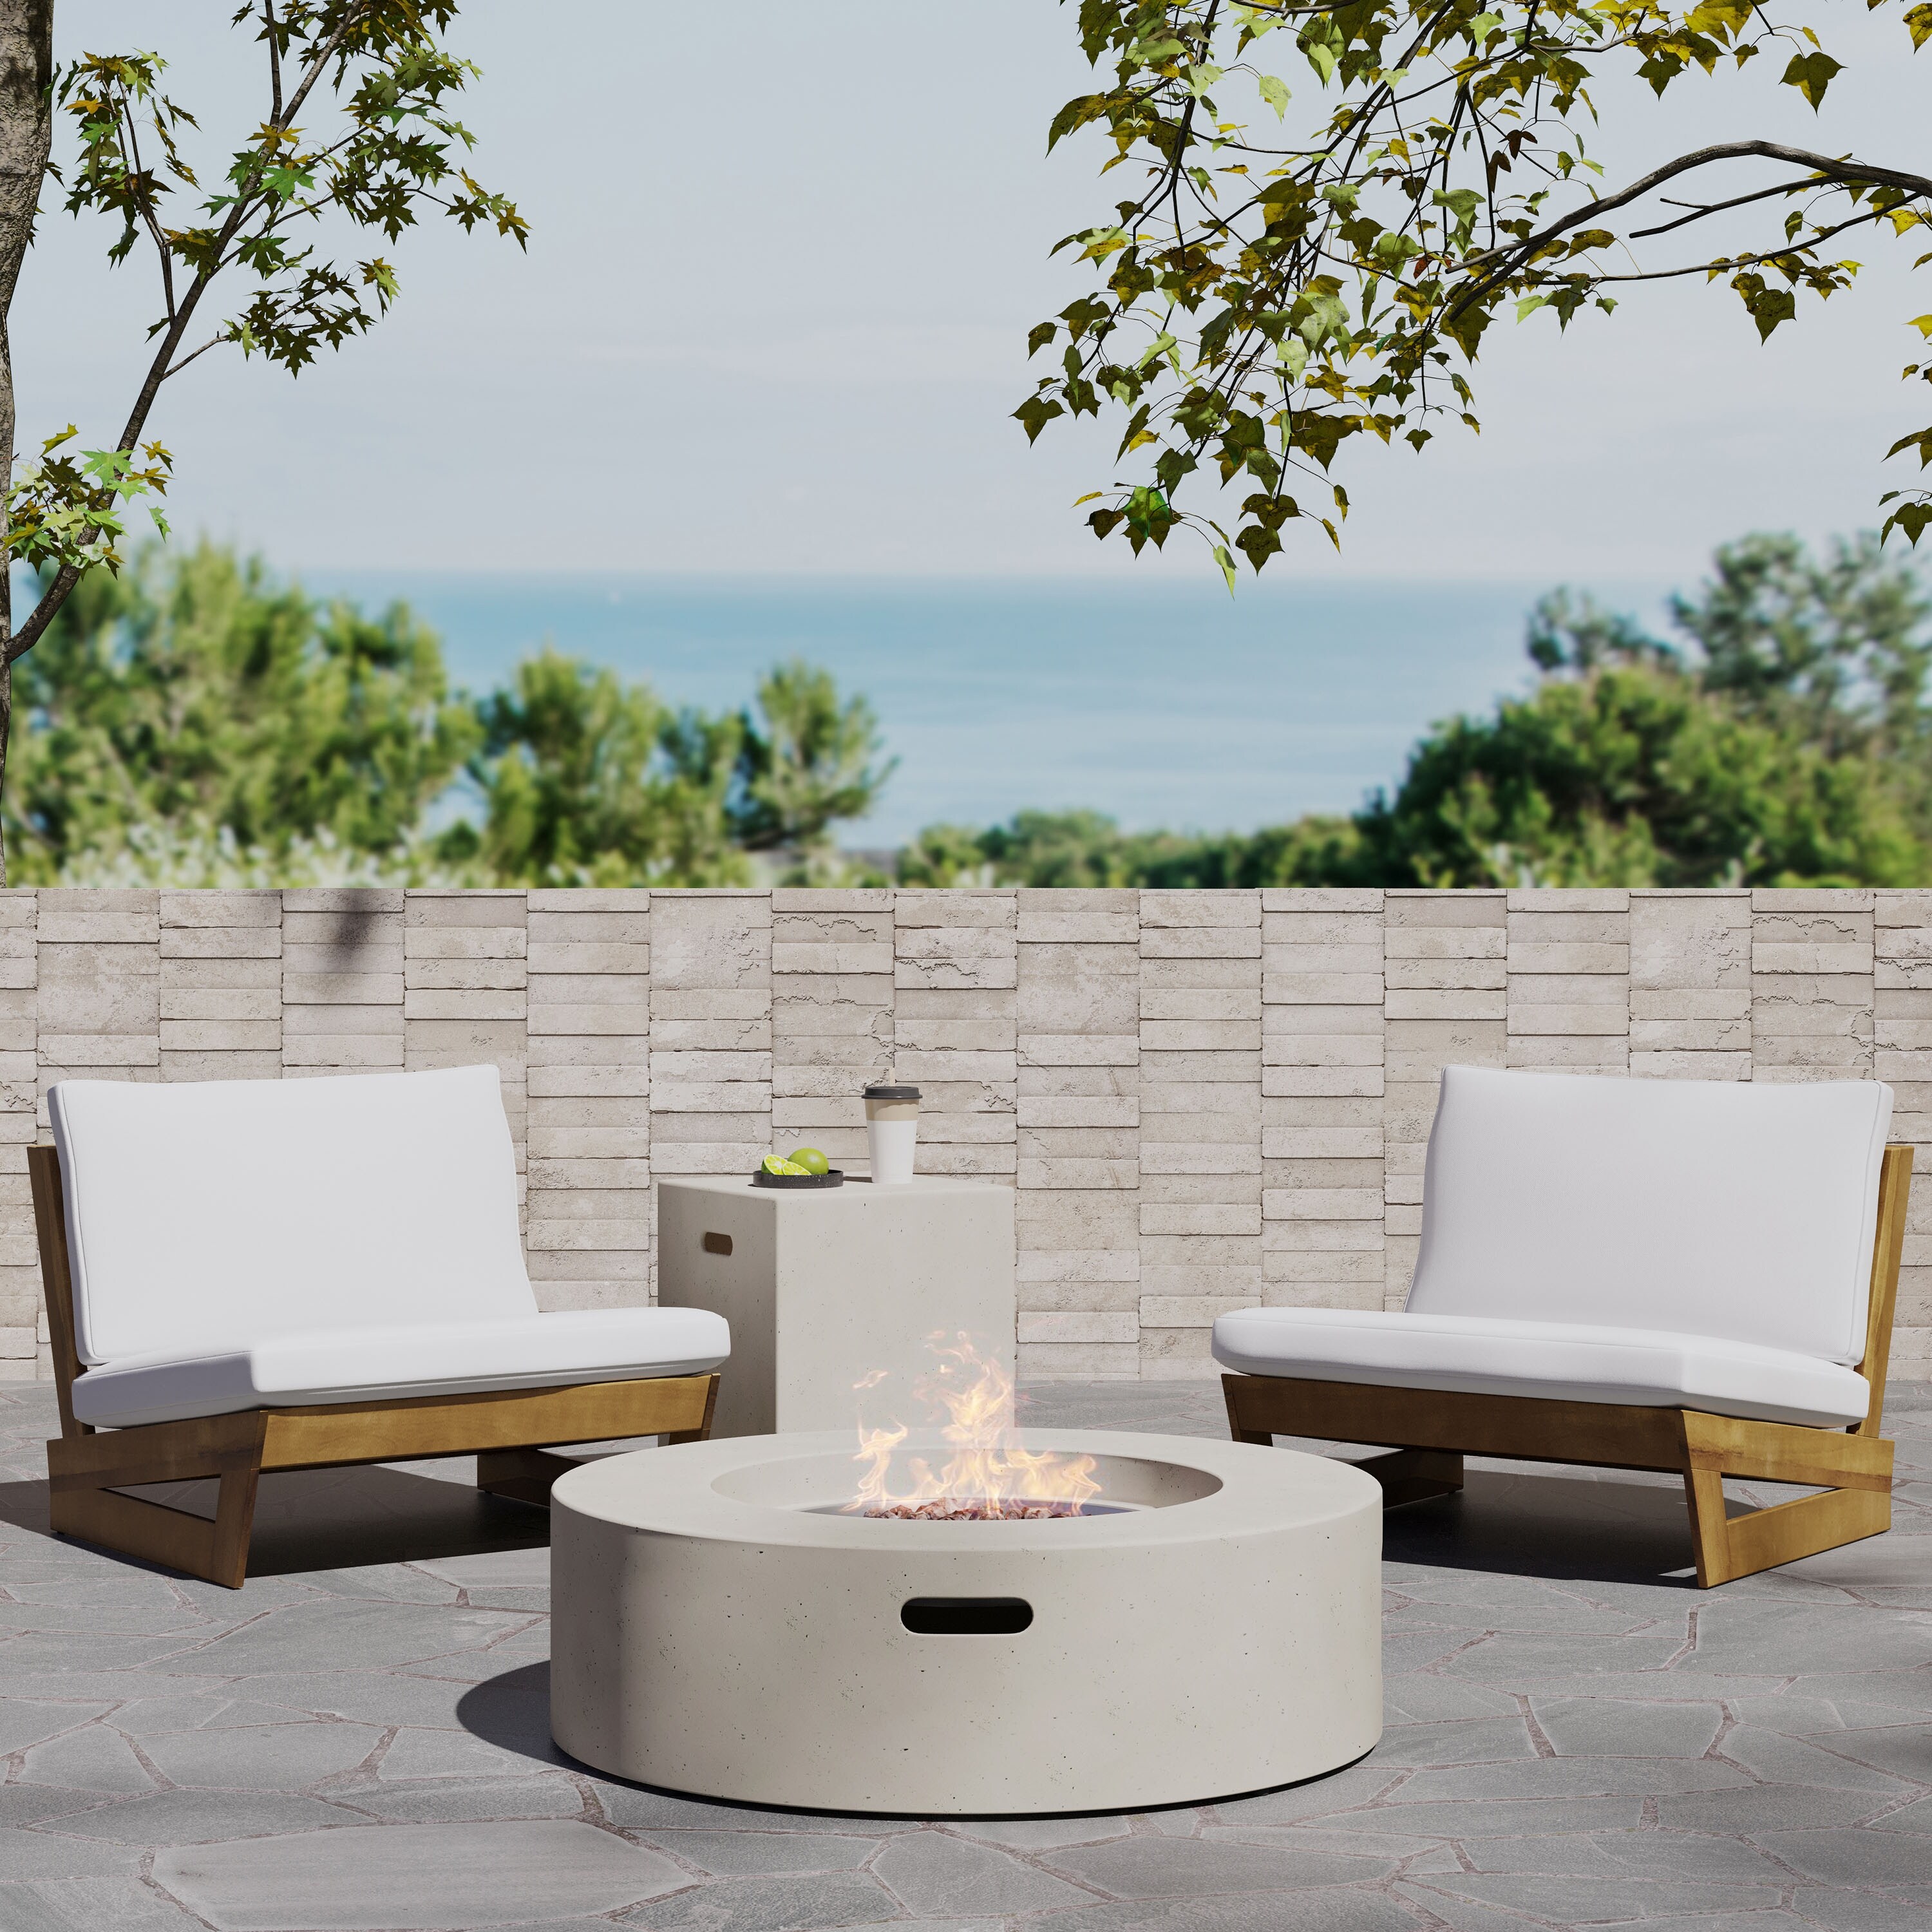 Christopher Knight Home Sherwood Acacia Wood Outdoor Lounge Chairs and 50,000 BTU Circular Propane Fire Pit